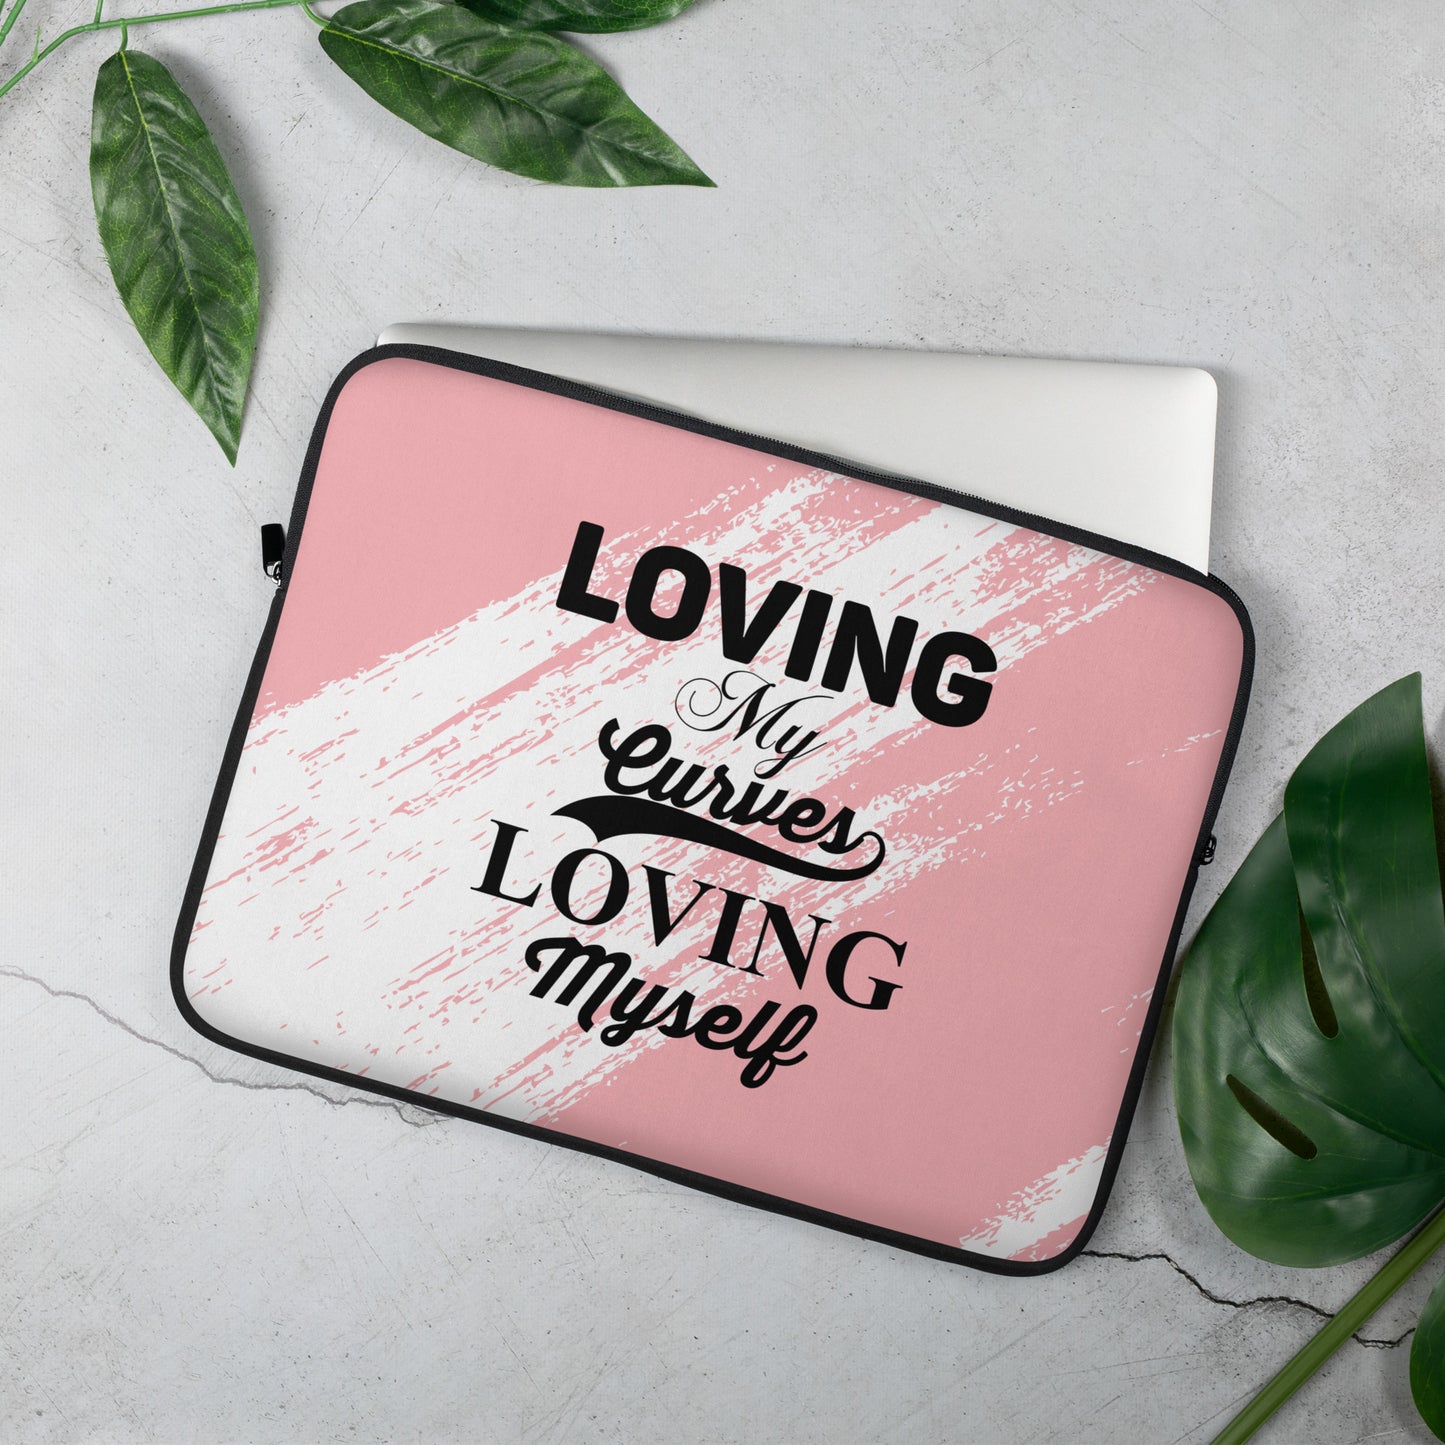 Loving My Curves Women's Empowerment Laptop Cover